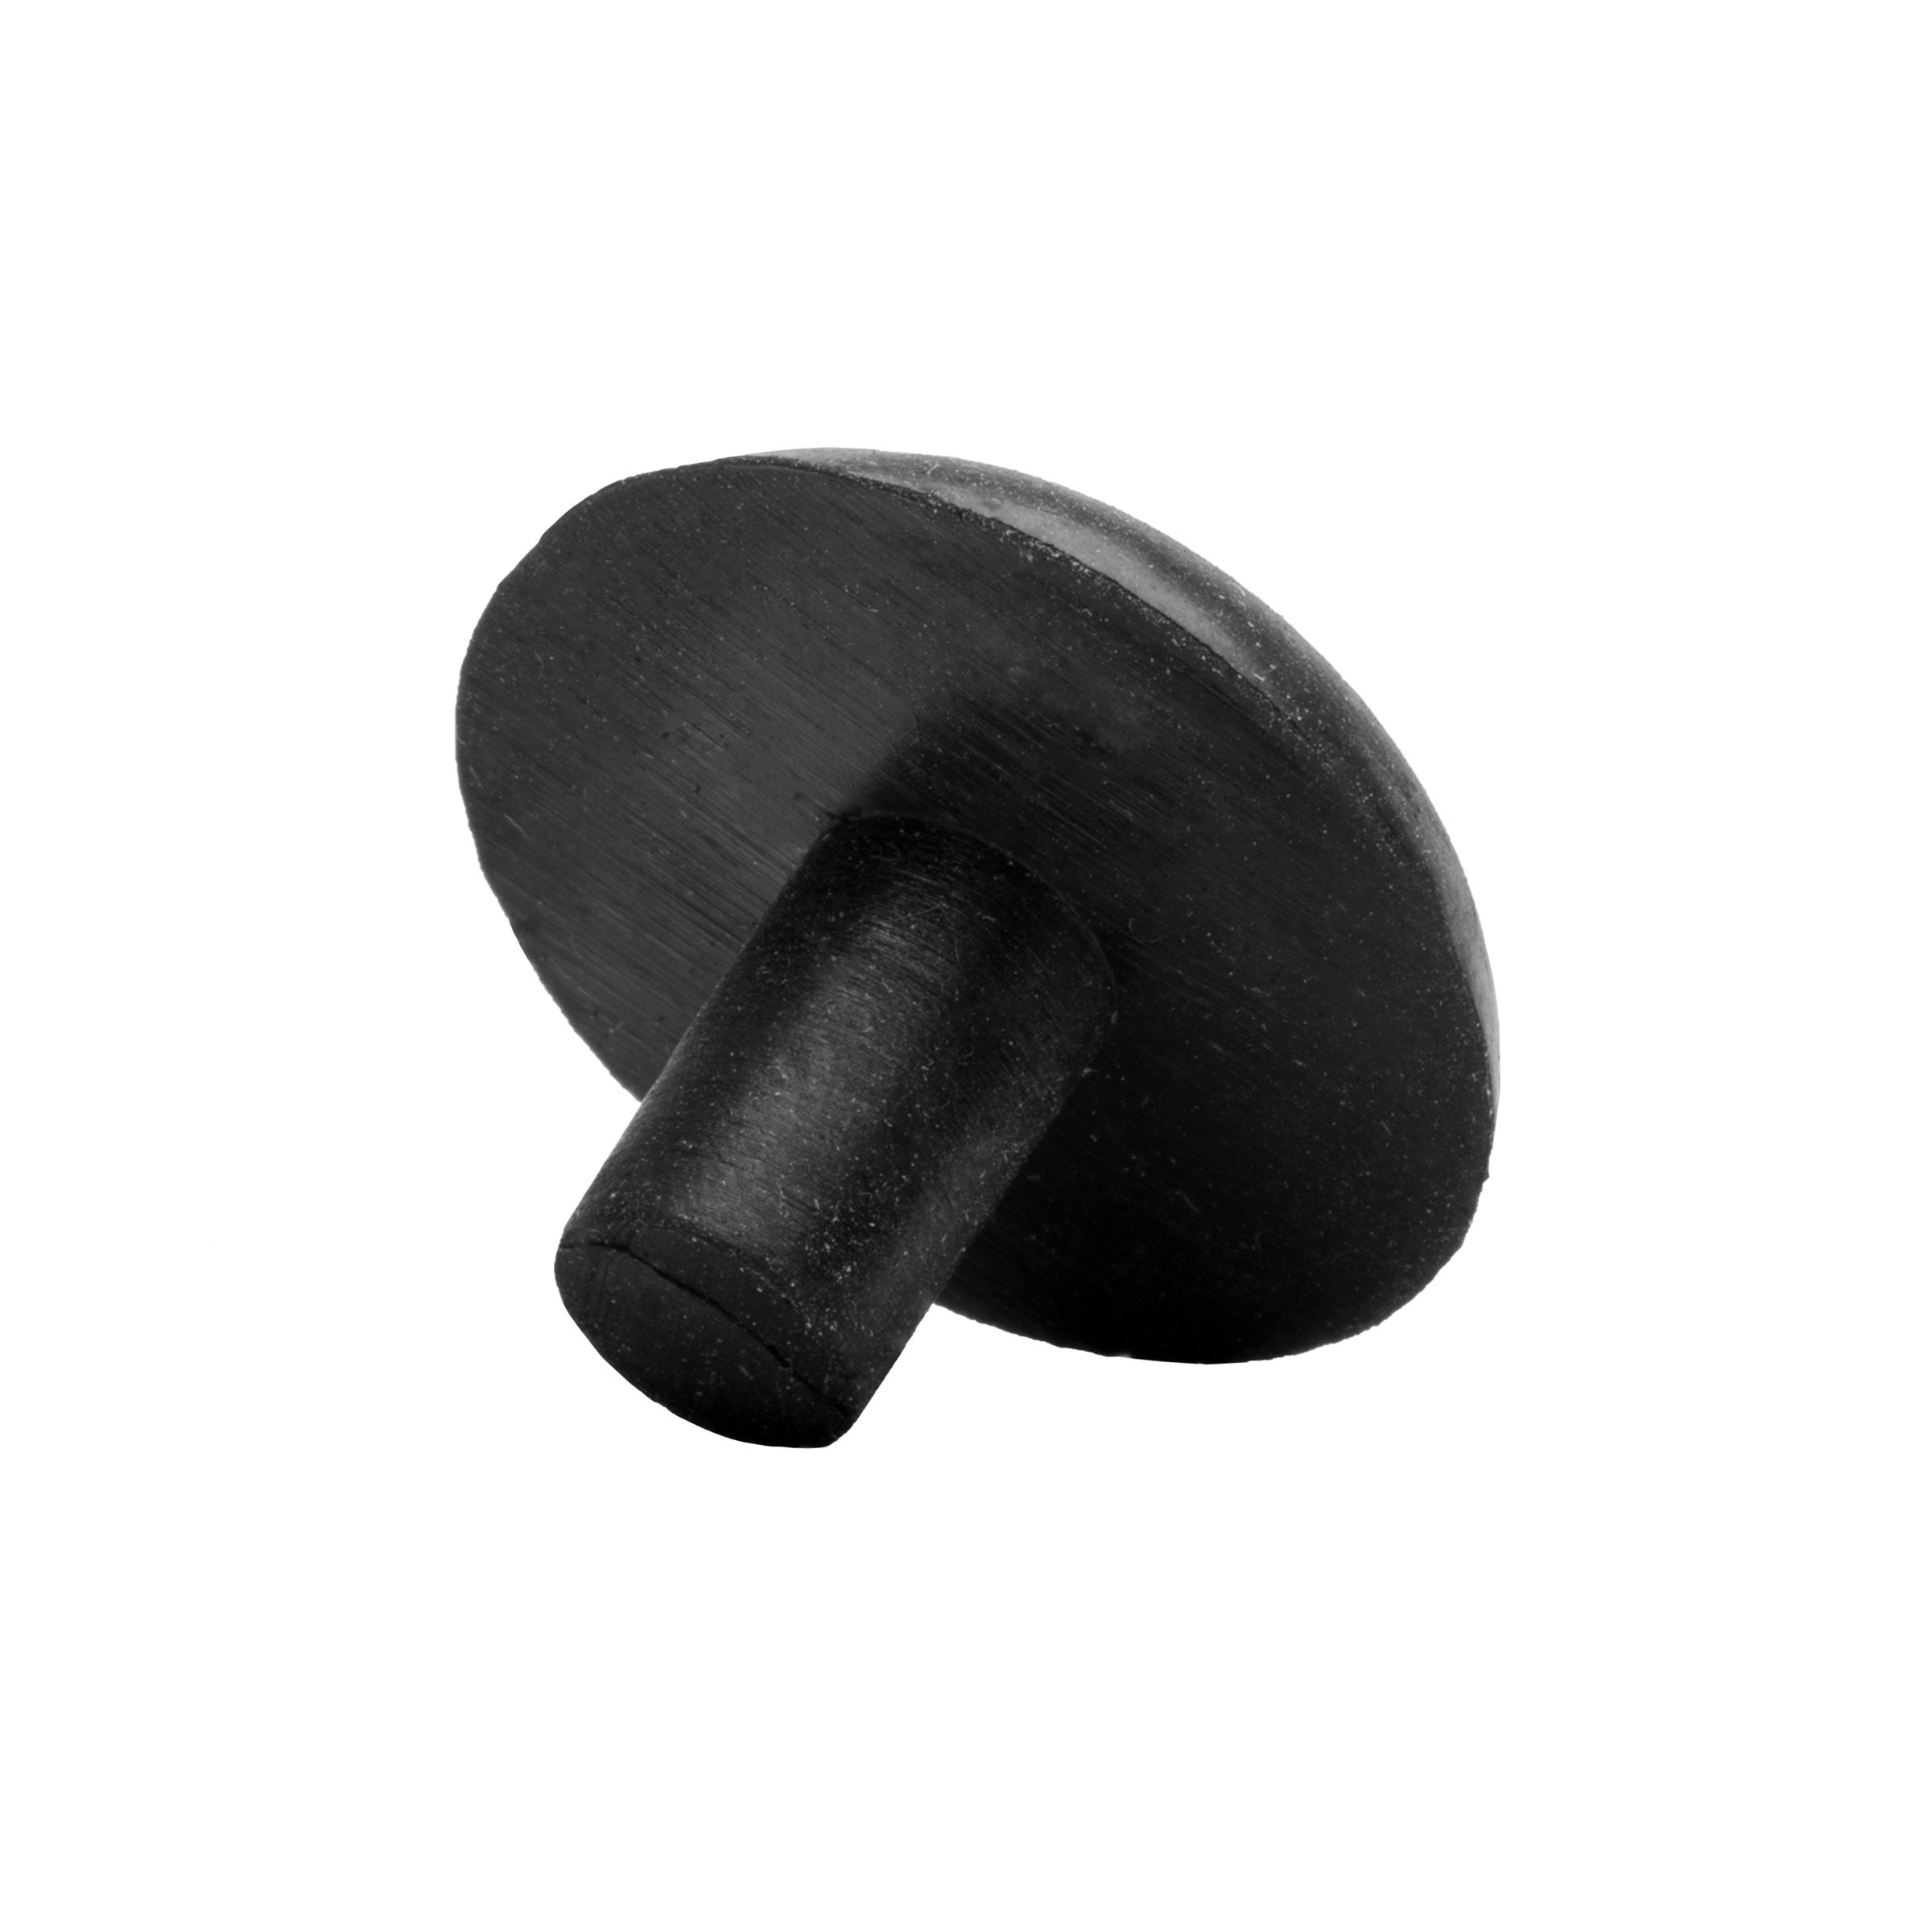 Butt Caps for Rod Building - Free Shipping